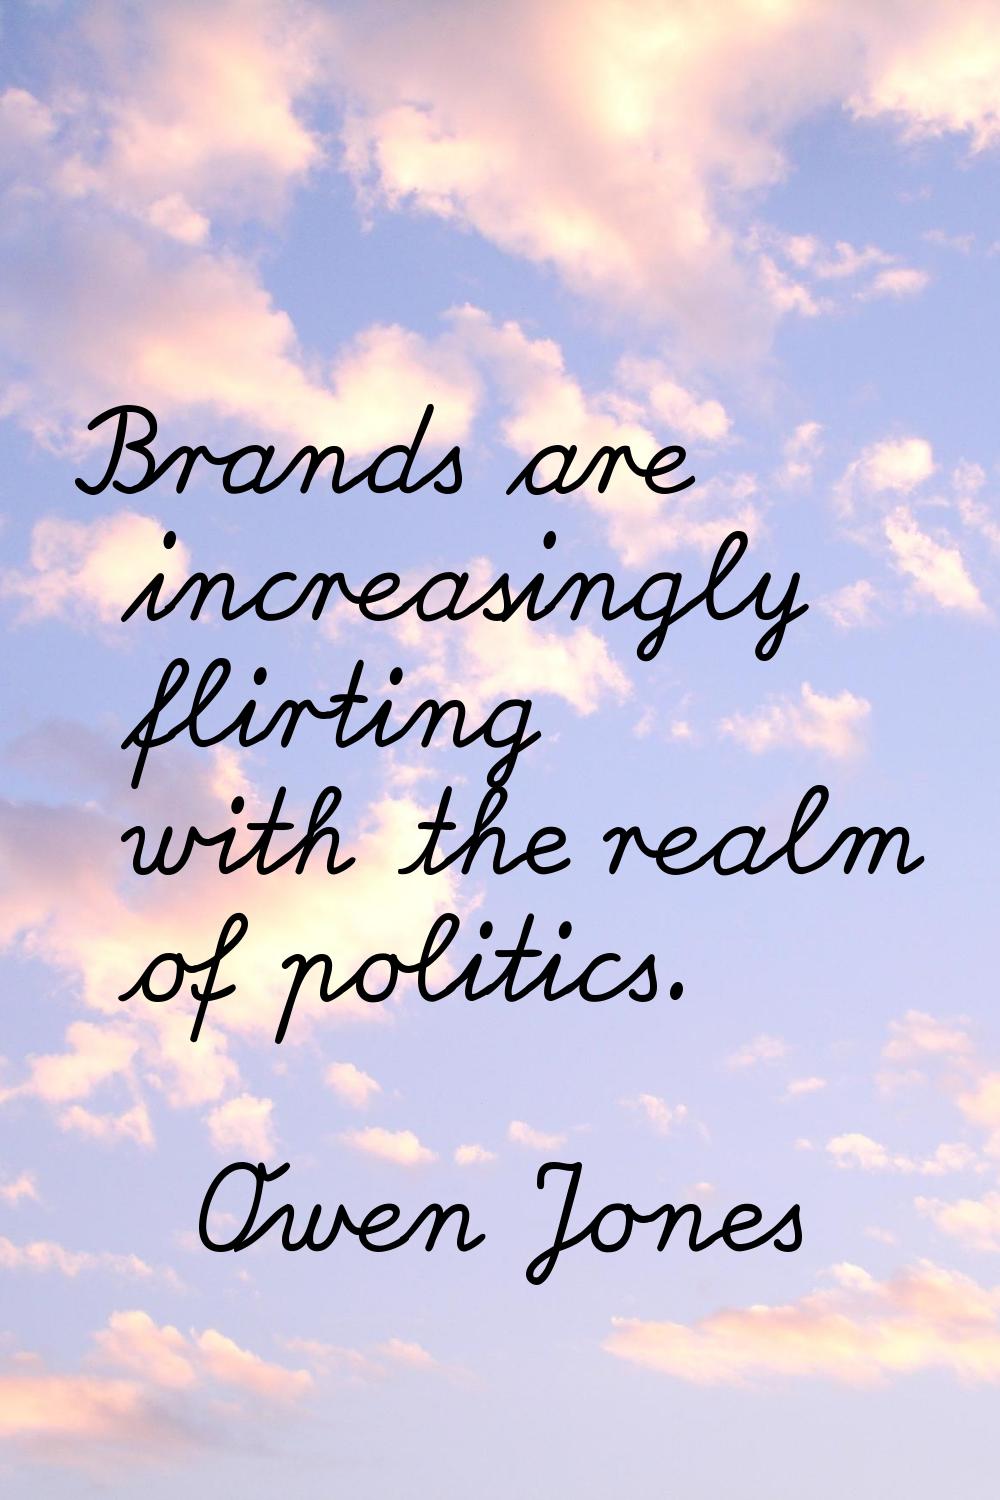 Brands are increasingly flirting with the realm of politics.